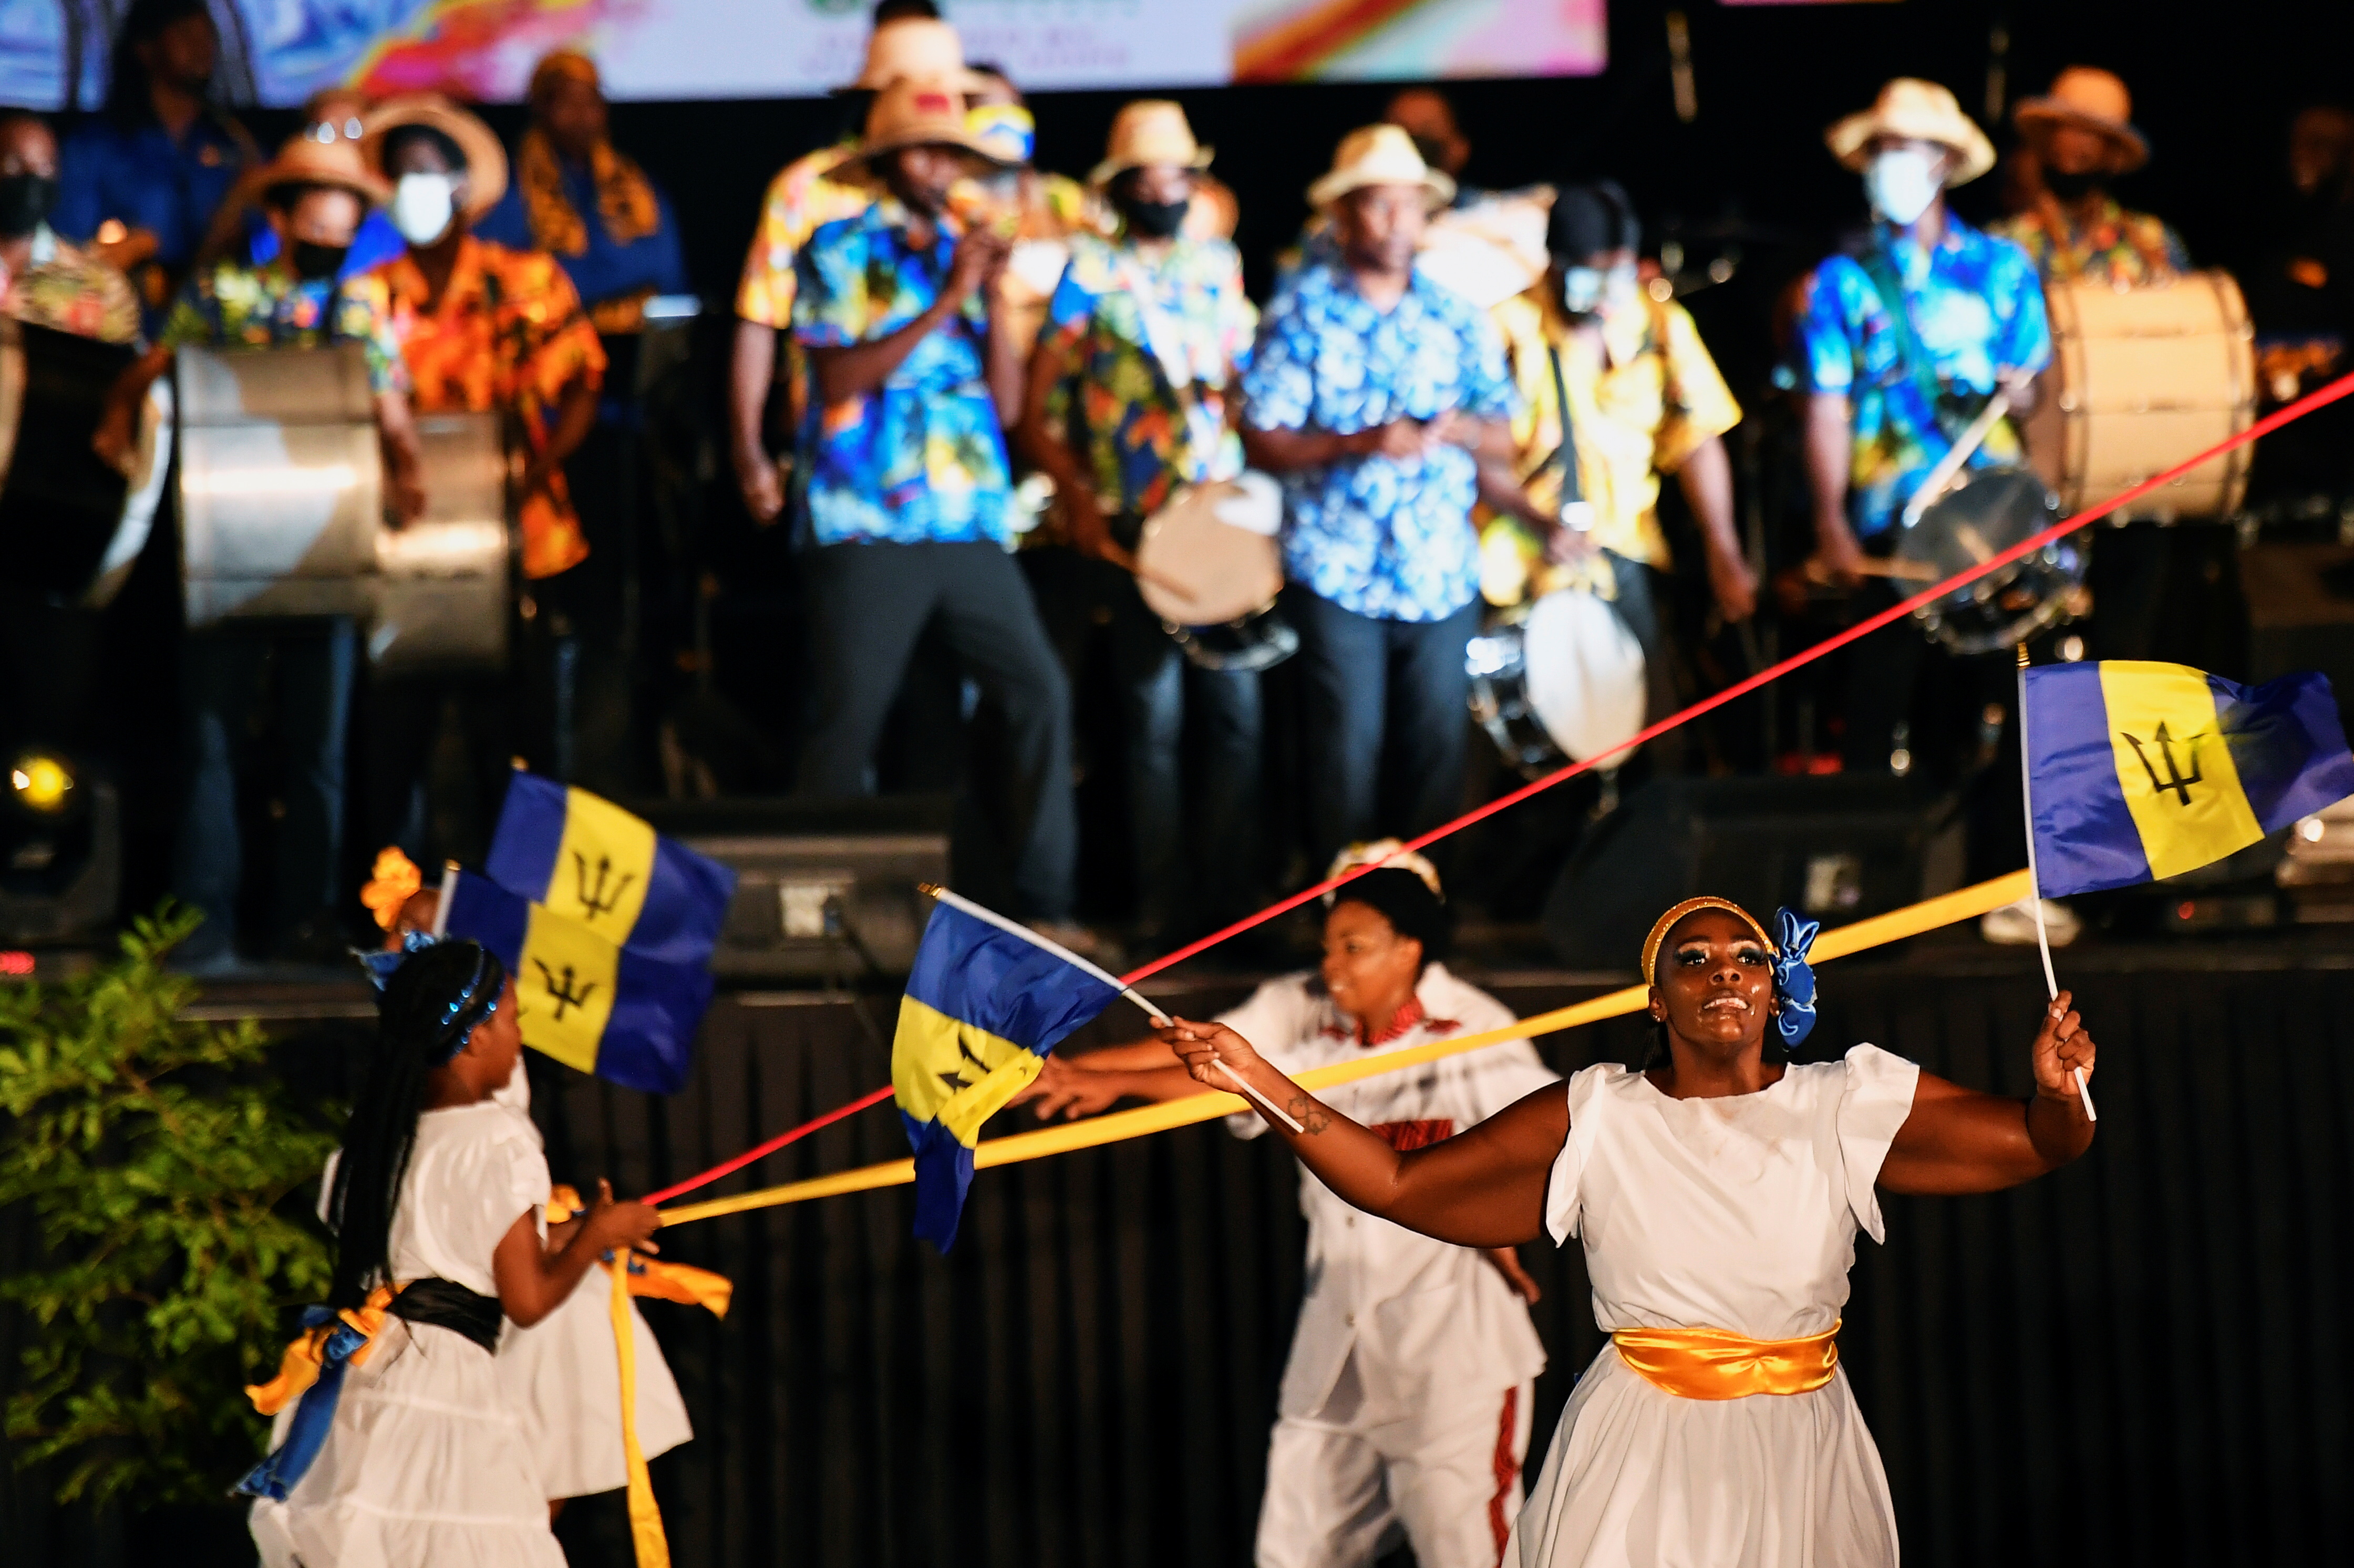 Celebrations take place as Barbados becomes a republic, in Bridgetown